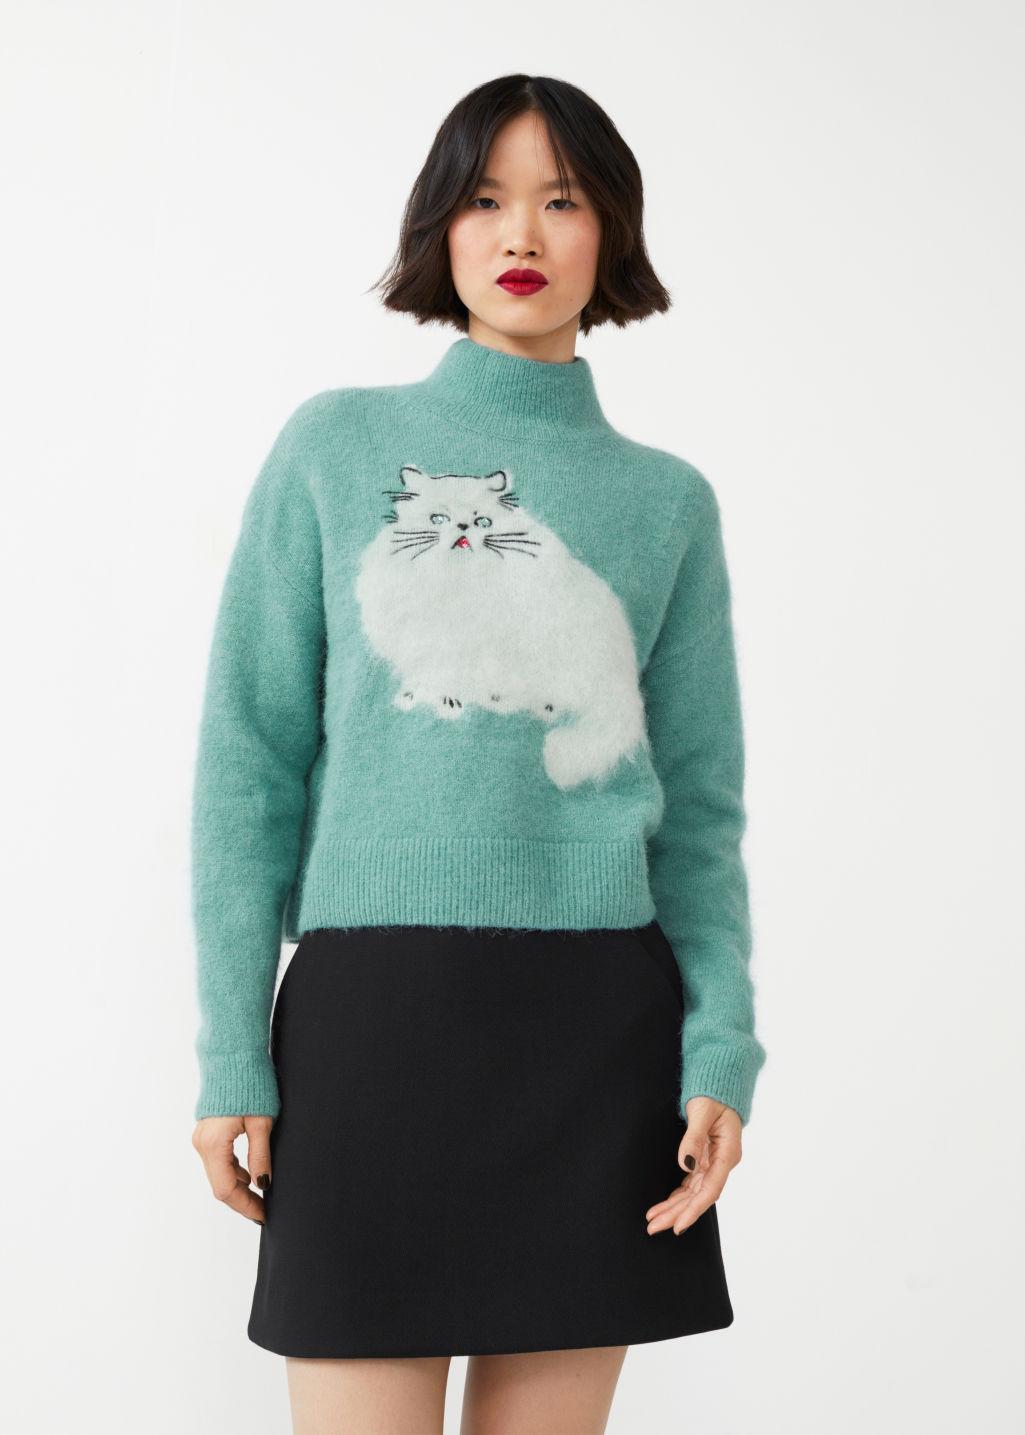 & Other Stories Jacquard Cat Motif Sweater in Green | Lyst